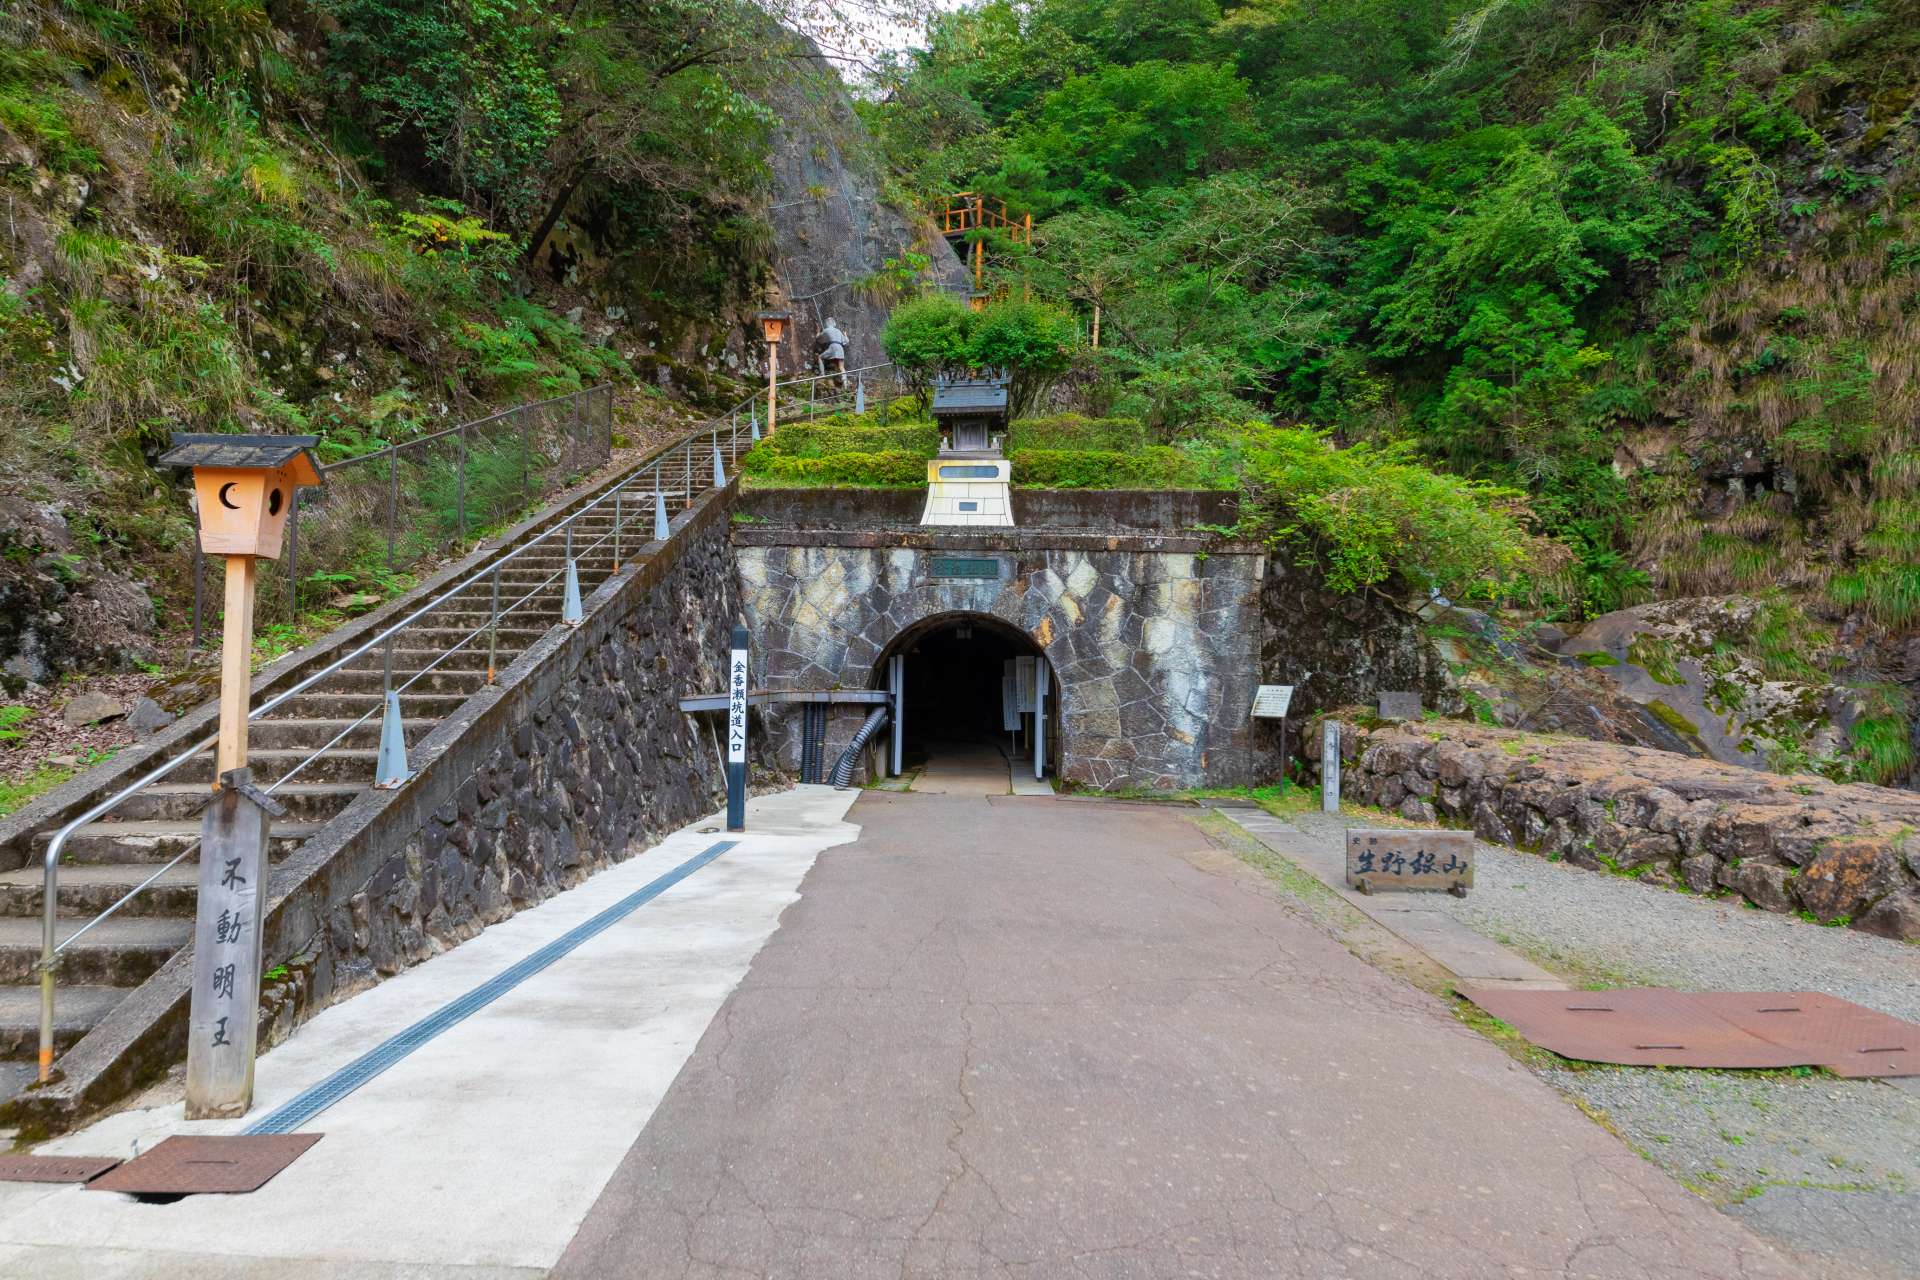 From the entrance with the French-style arch, a 1,000m (0.6 miles) course stretches in the tunnel, about a 40 min tour.